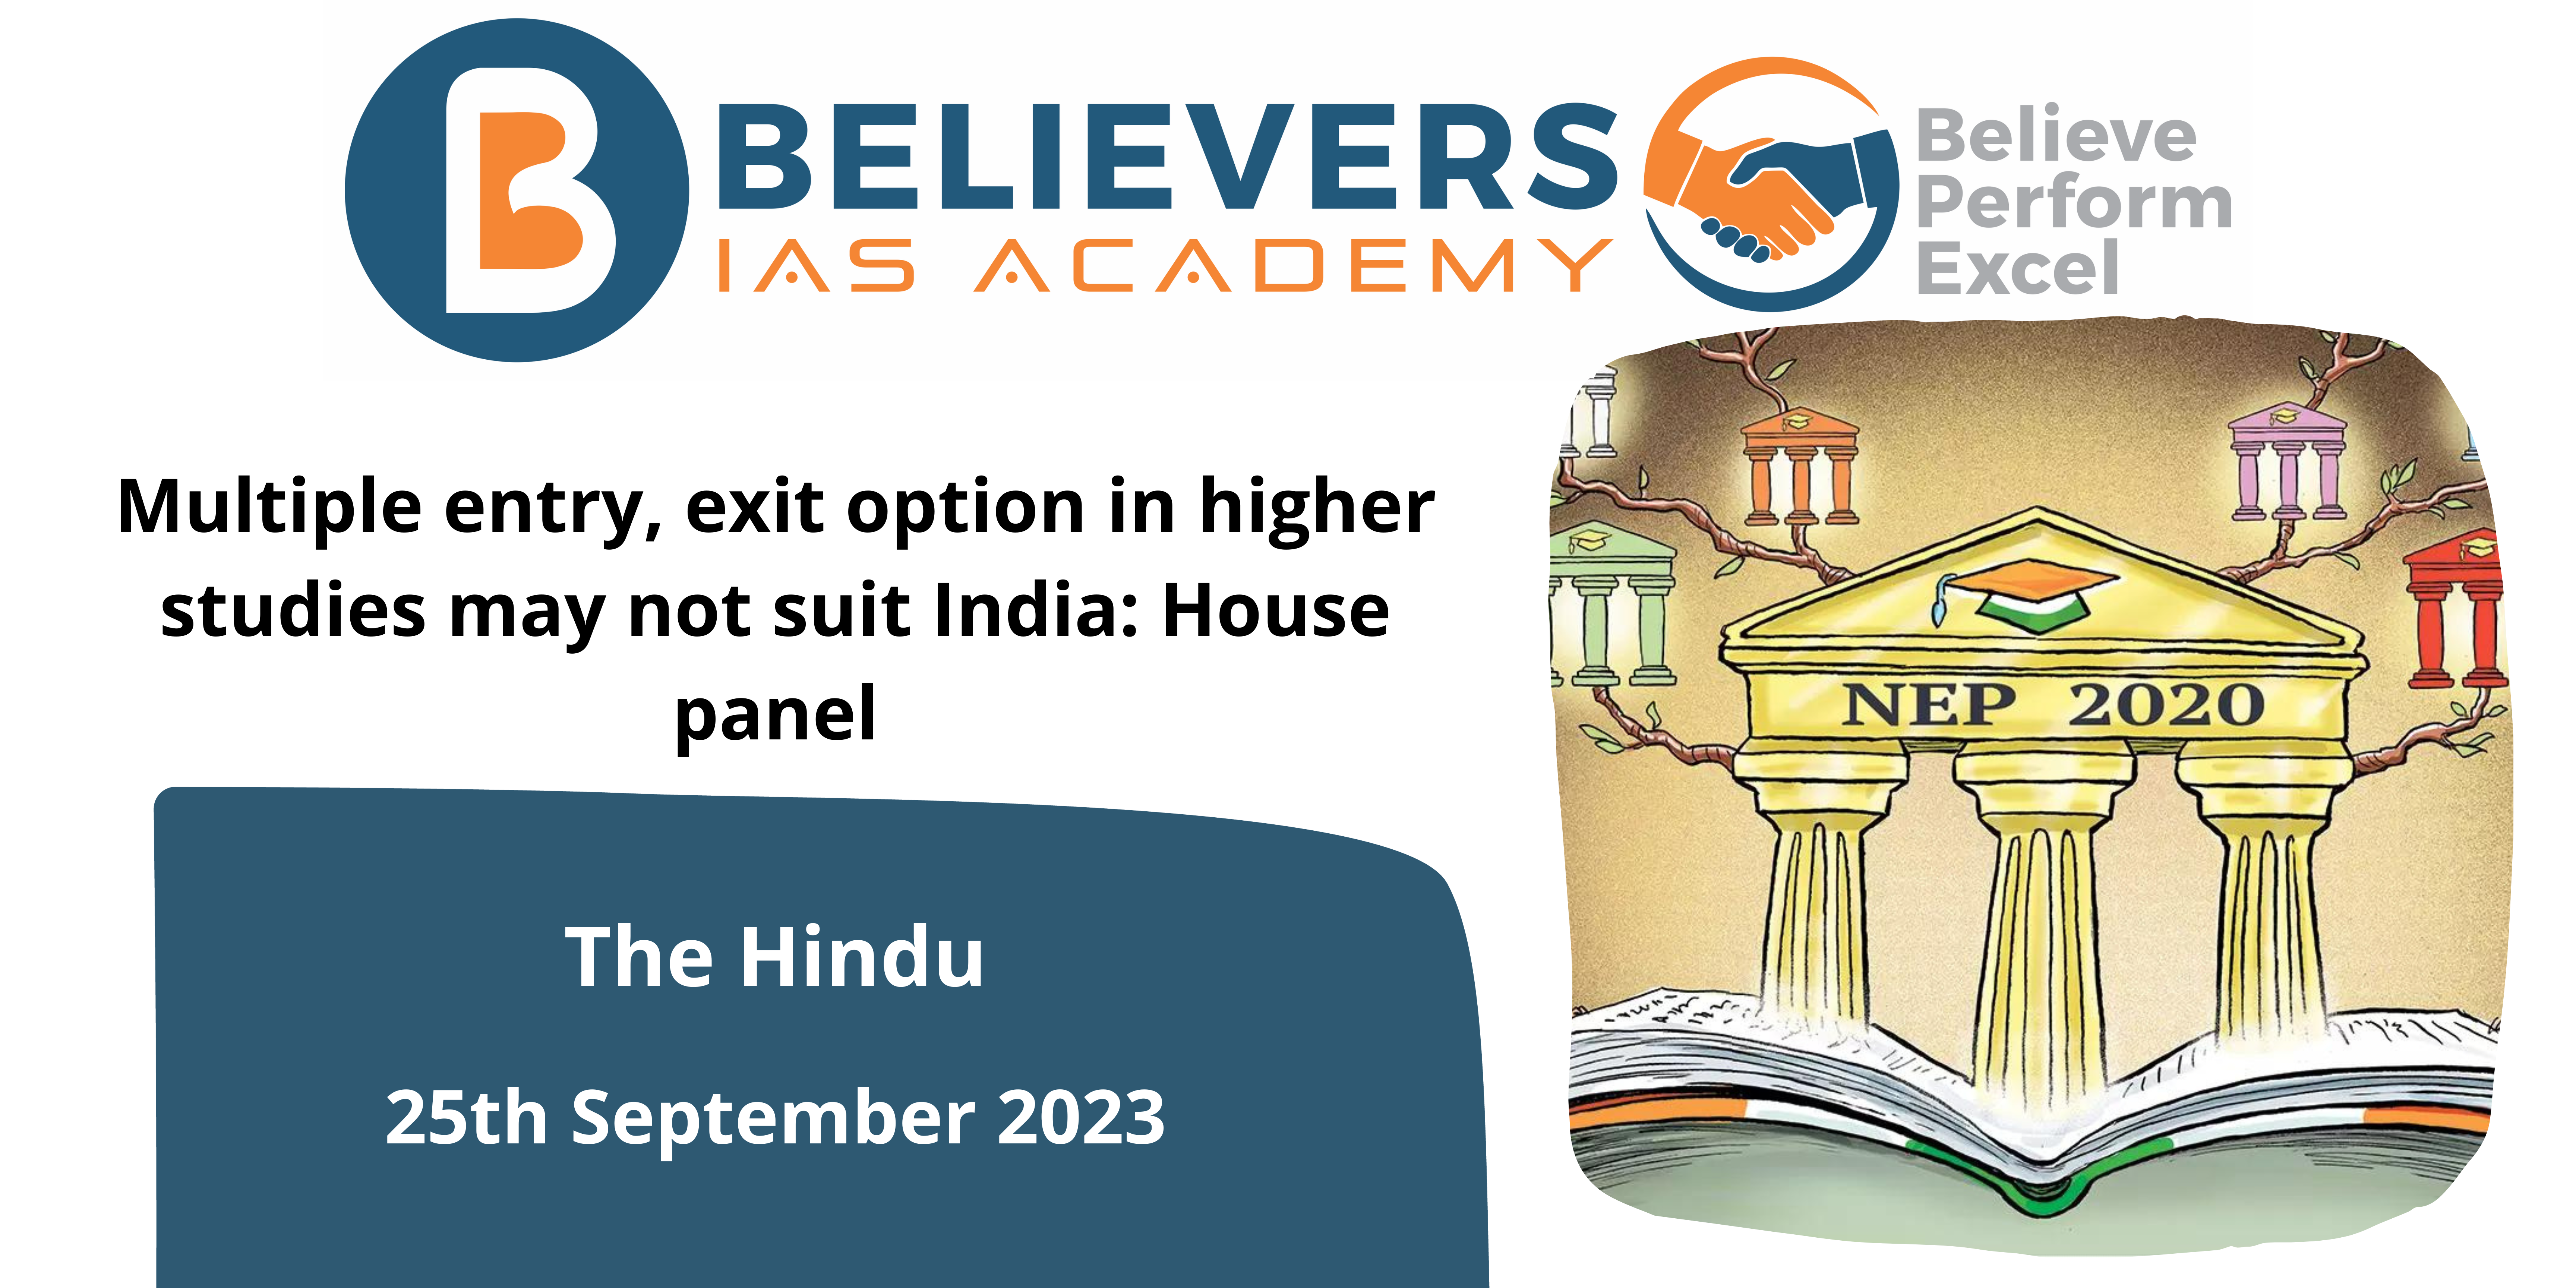 Multiple entry, exit option in higher studies may not suit India: House panel